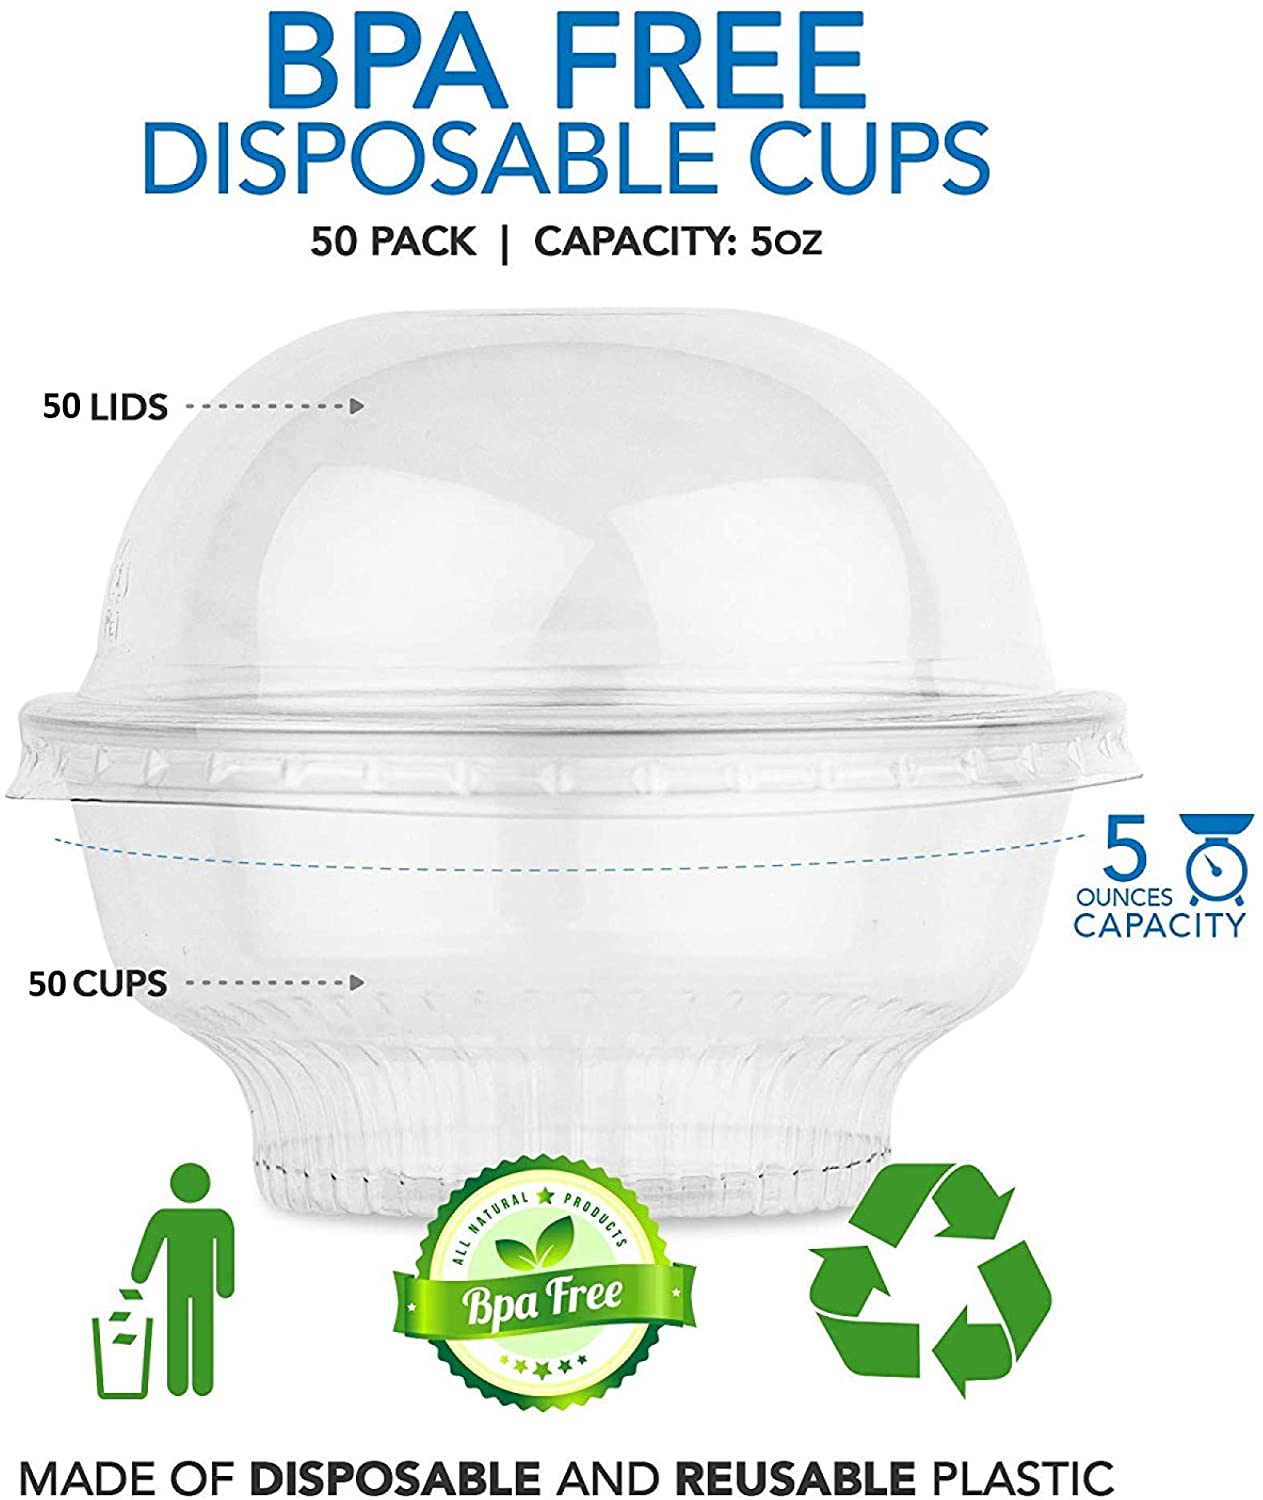 Stock Your Home 9 oz Plastic Dessert Cups with Dome Lid - 50 Count, Clear